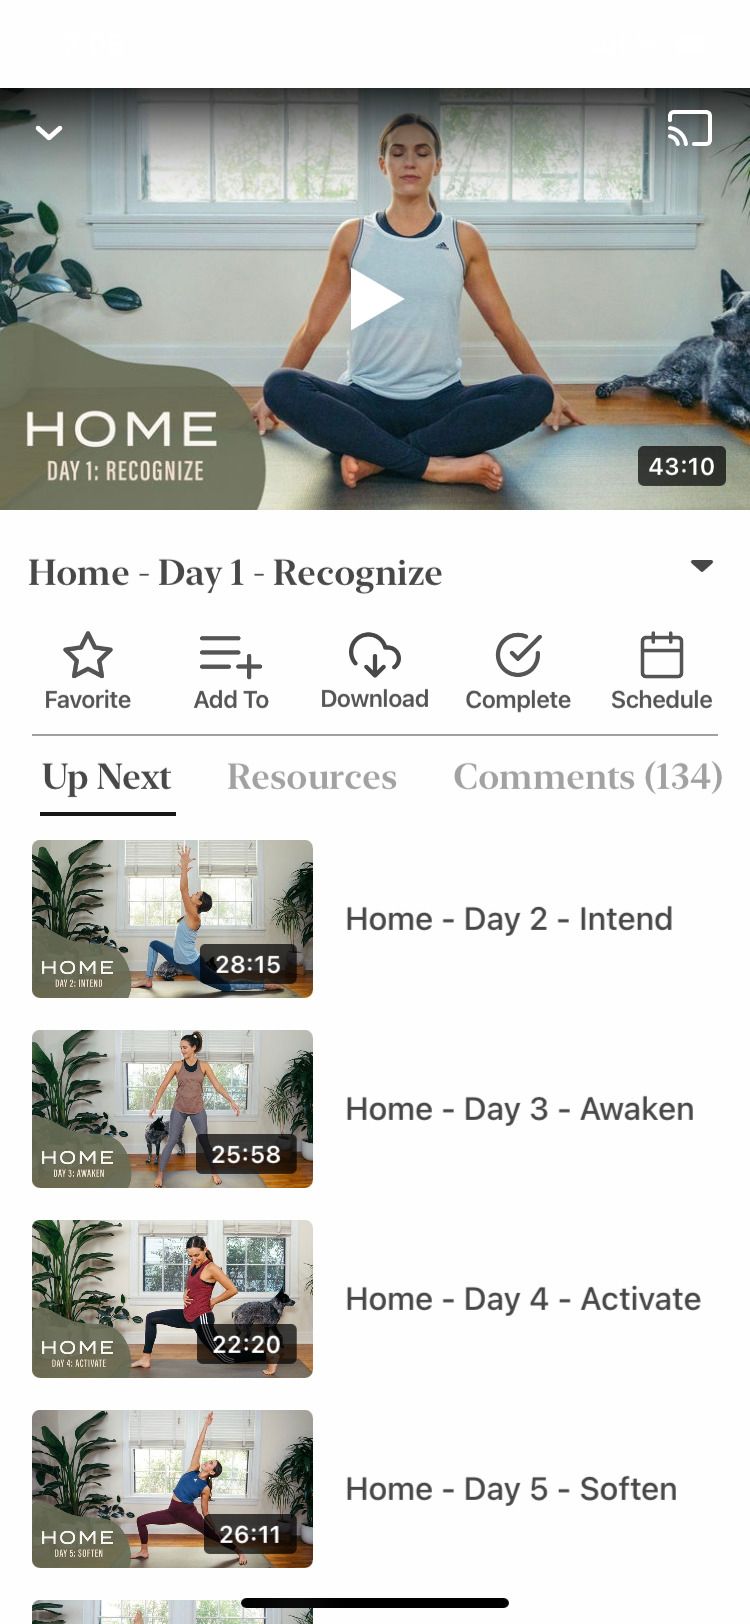 Love Yoga with Adriene? Her Streaming Service “Find What Feels